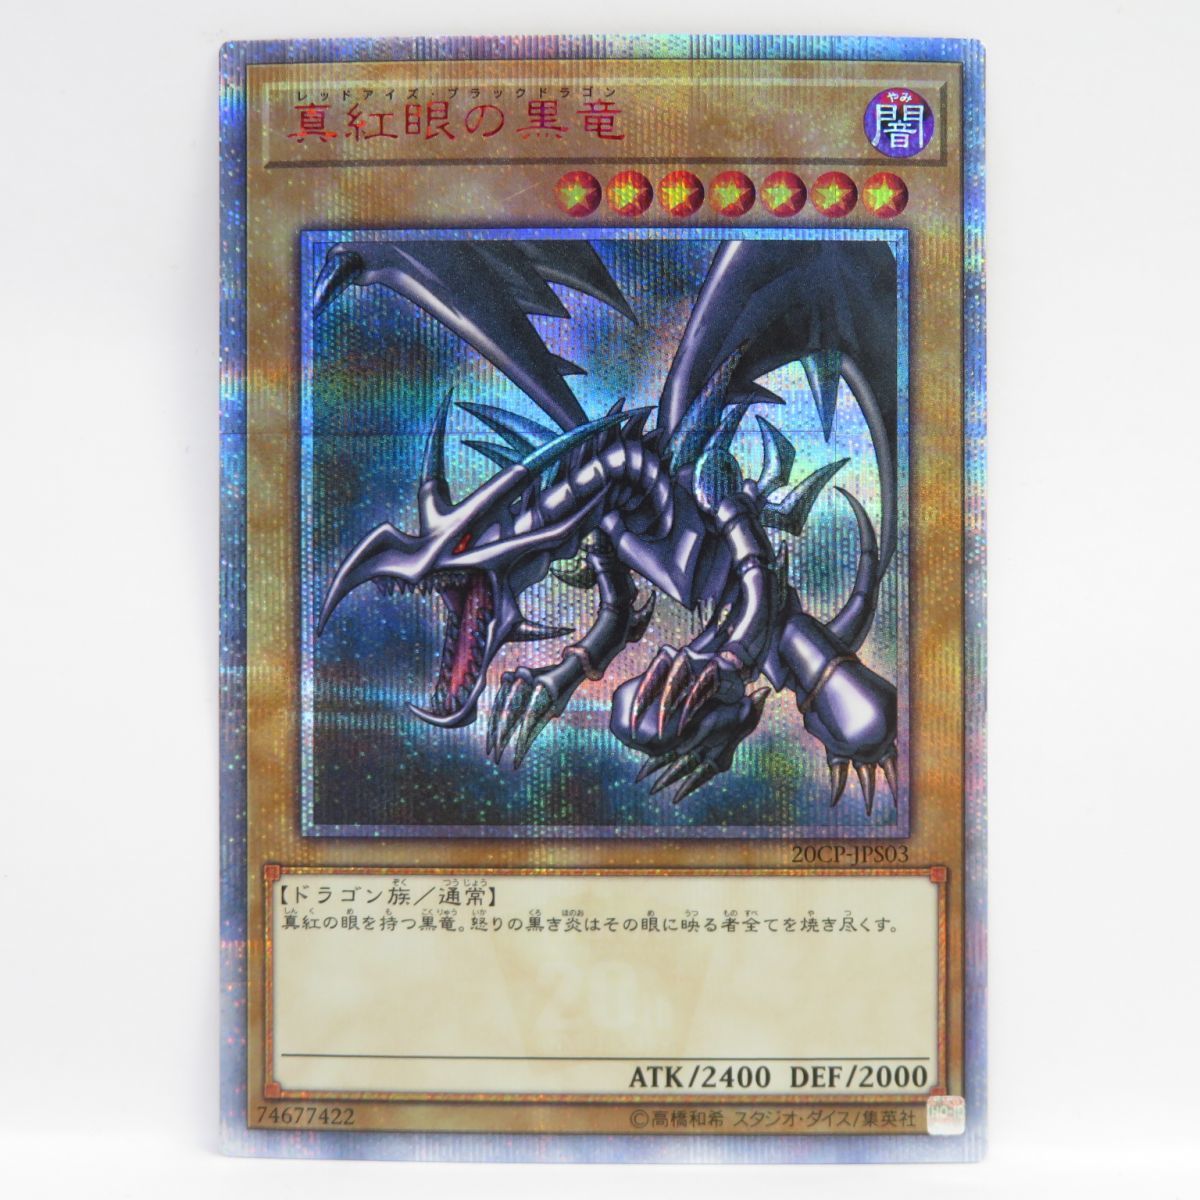 077s 遊戯王 真紅眼の黒竜 20CP-JPS03 20thシークレットレア ※中古